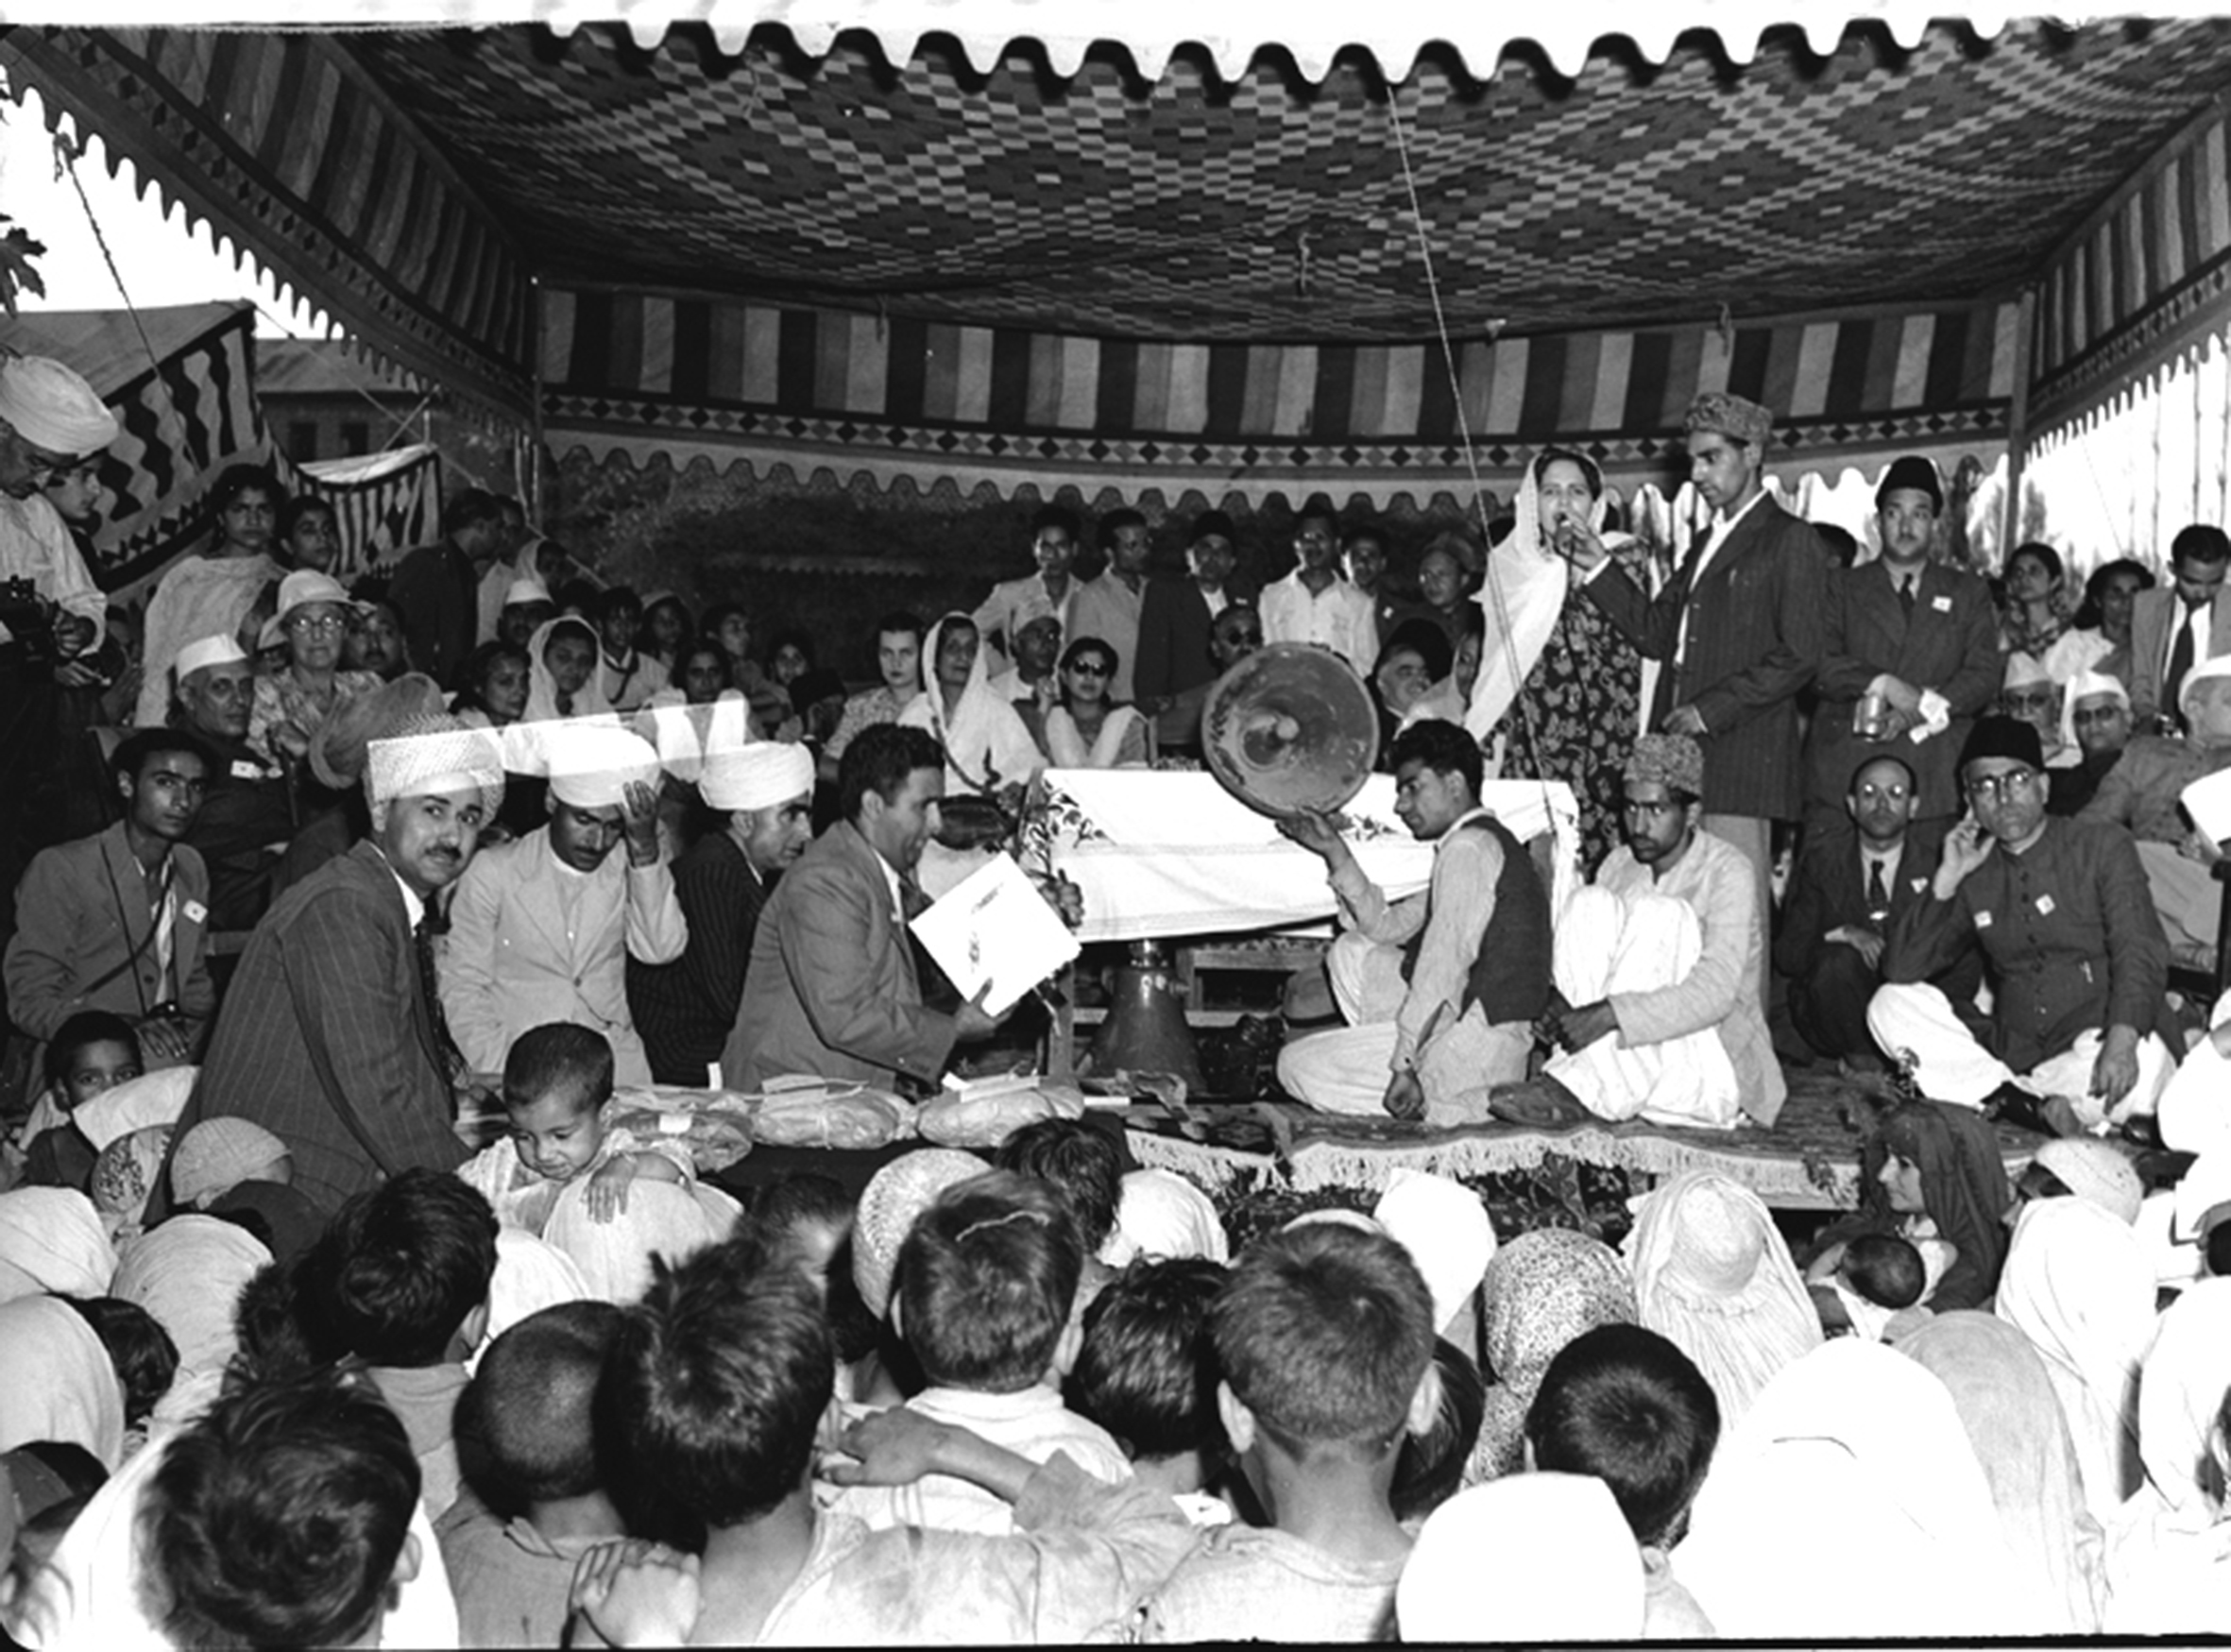 The government organised a baby show on September 25, 1949 to provide entertainment to the delegates who were in Srinagar to attend annual session of NC. While a woman is making a speech, those listening include Pandit Nehru, Rajkumari Amrit Kaur NV Gadgil & Sheikh Muhammad Abdullah